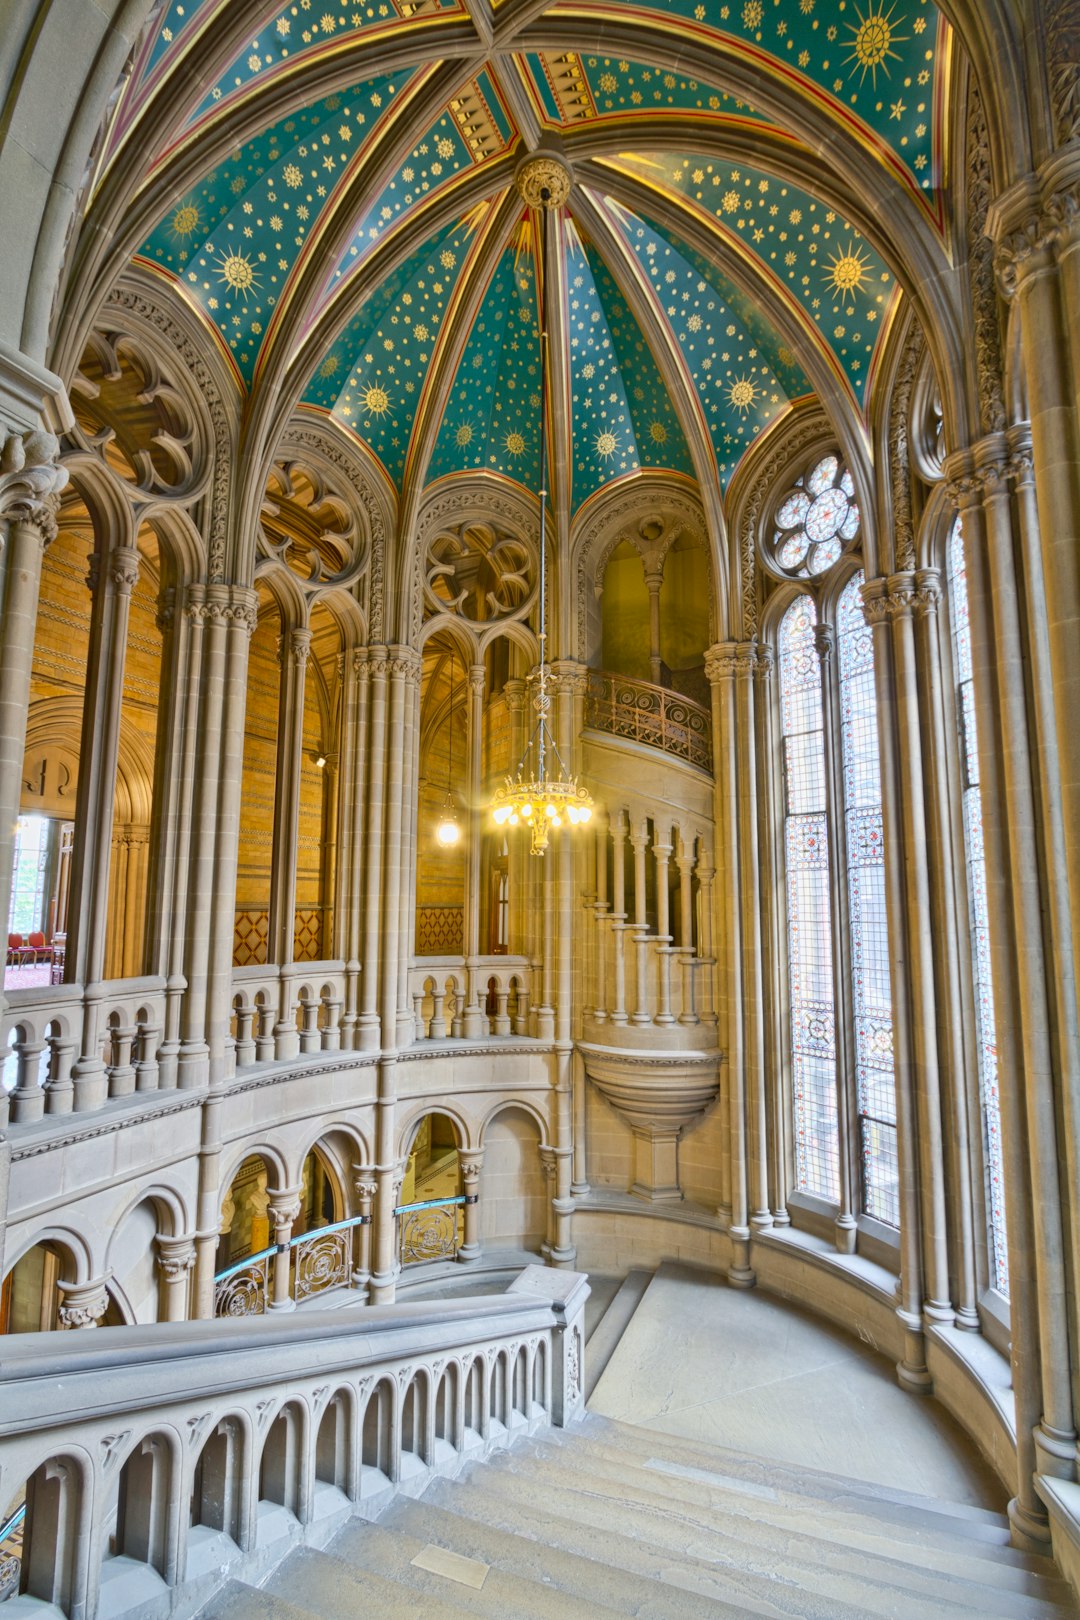 Here is a photograph taken from a staircase inside Manchester Town Hall.  Located in Manchester, Greater Manchester, England.  Website : www.michaeldbeckwith.com   Email : michael@michaeldbeckwith.com